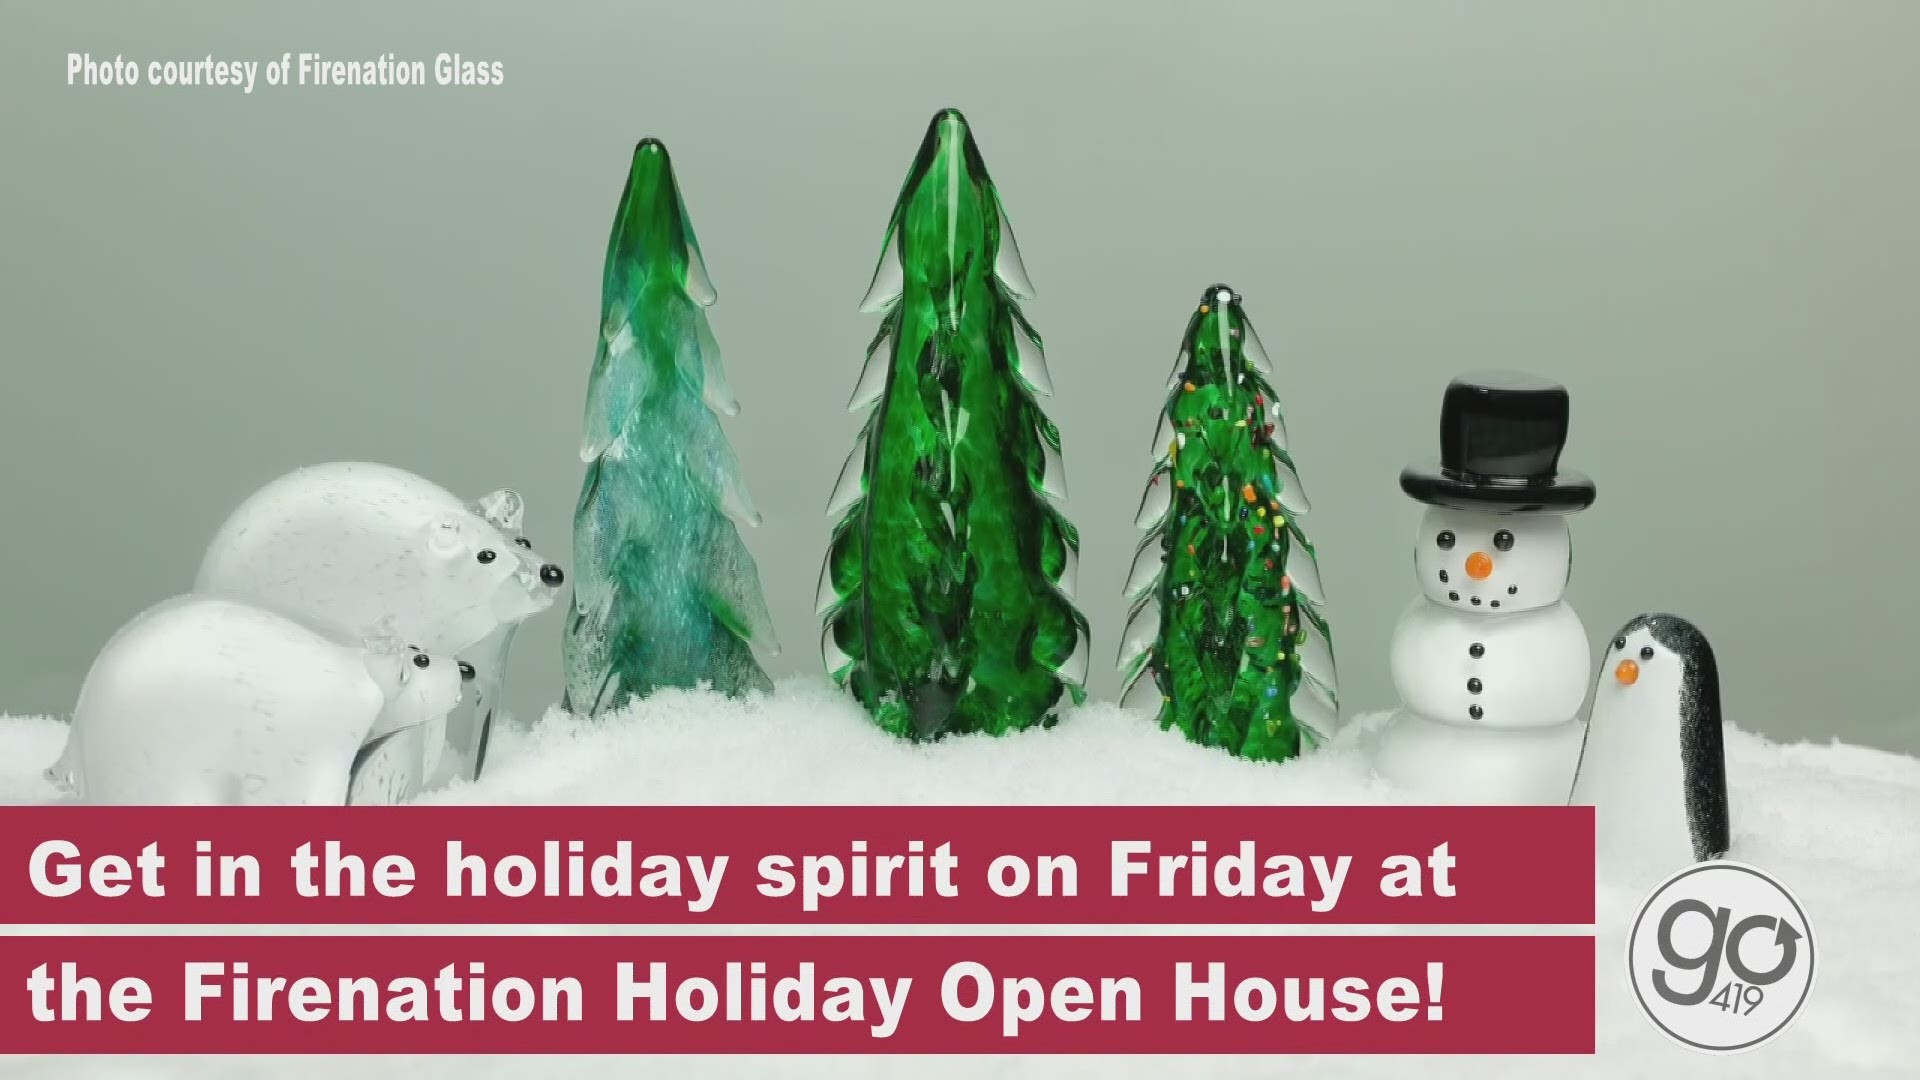 The Firenation Glass Holiday Open House kicks off Friday from 6-10 p.m.